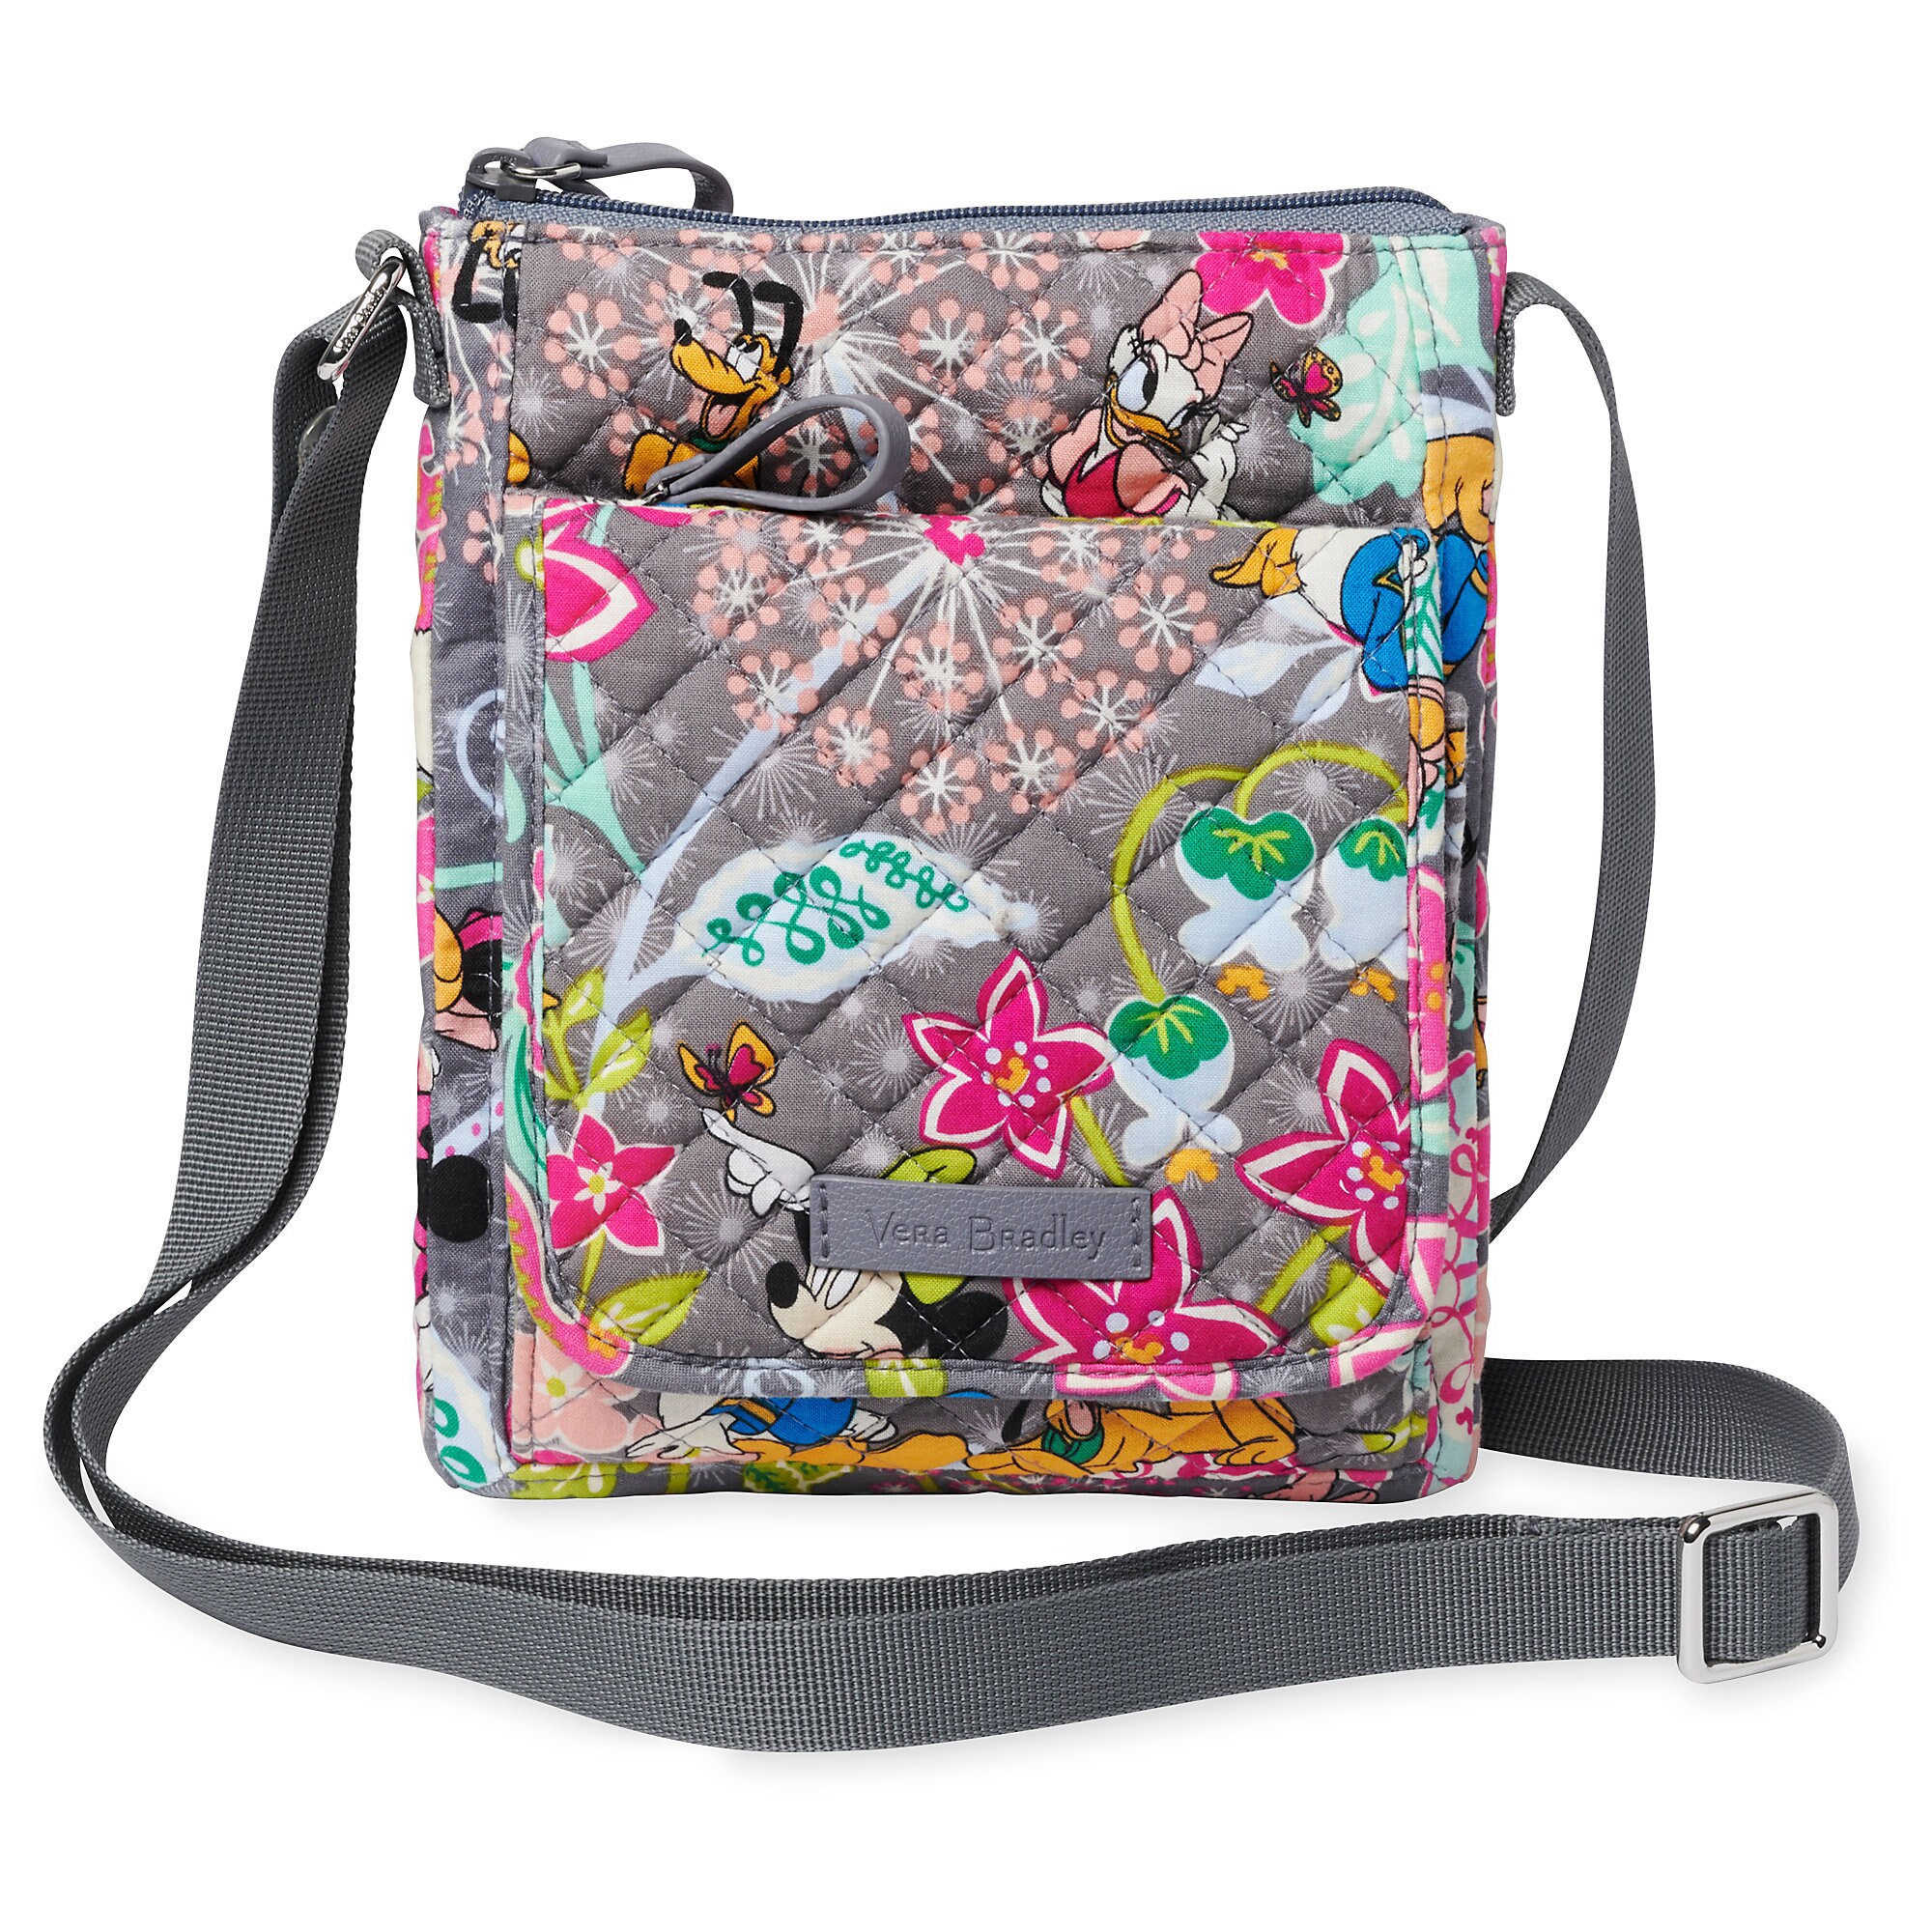 Mickey Mouse and Friends Mini Hipster Bag by Vera Bradley